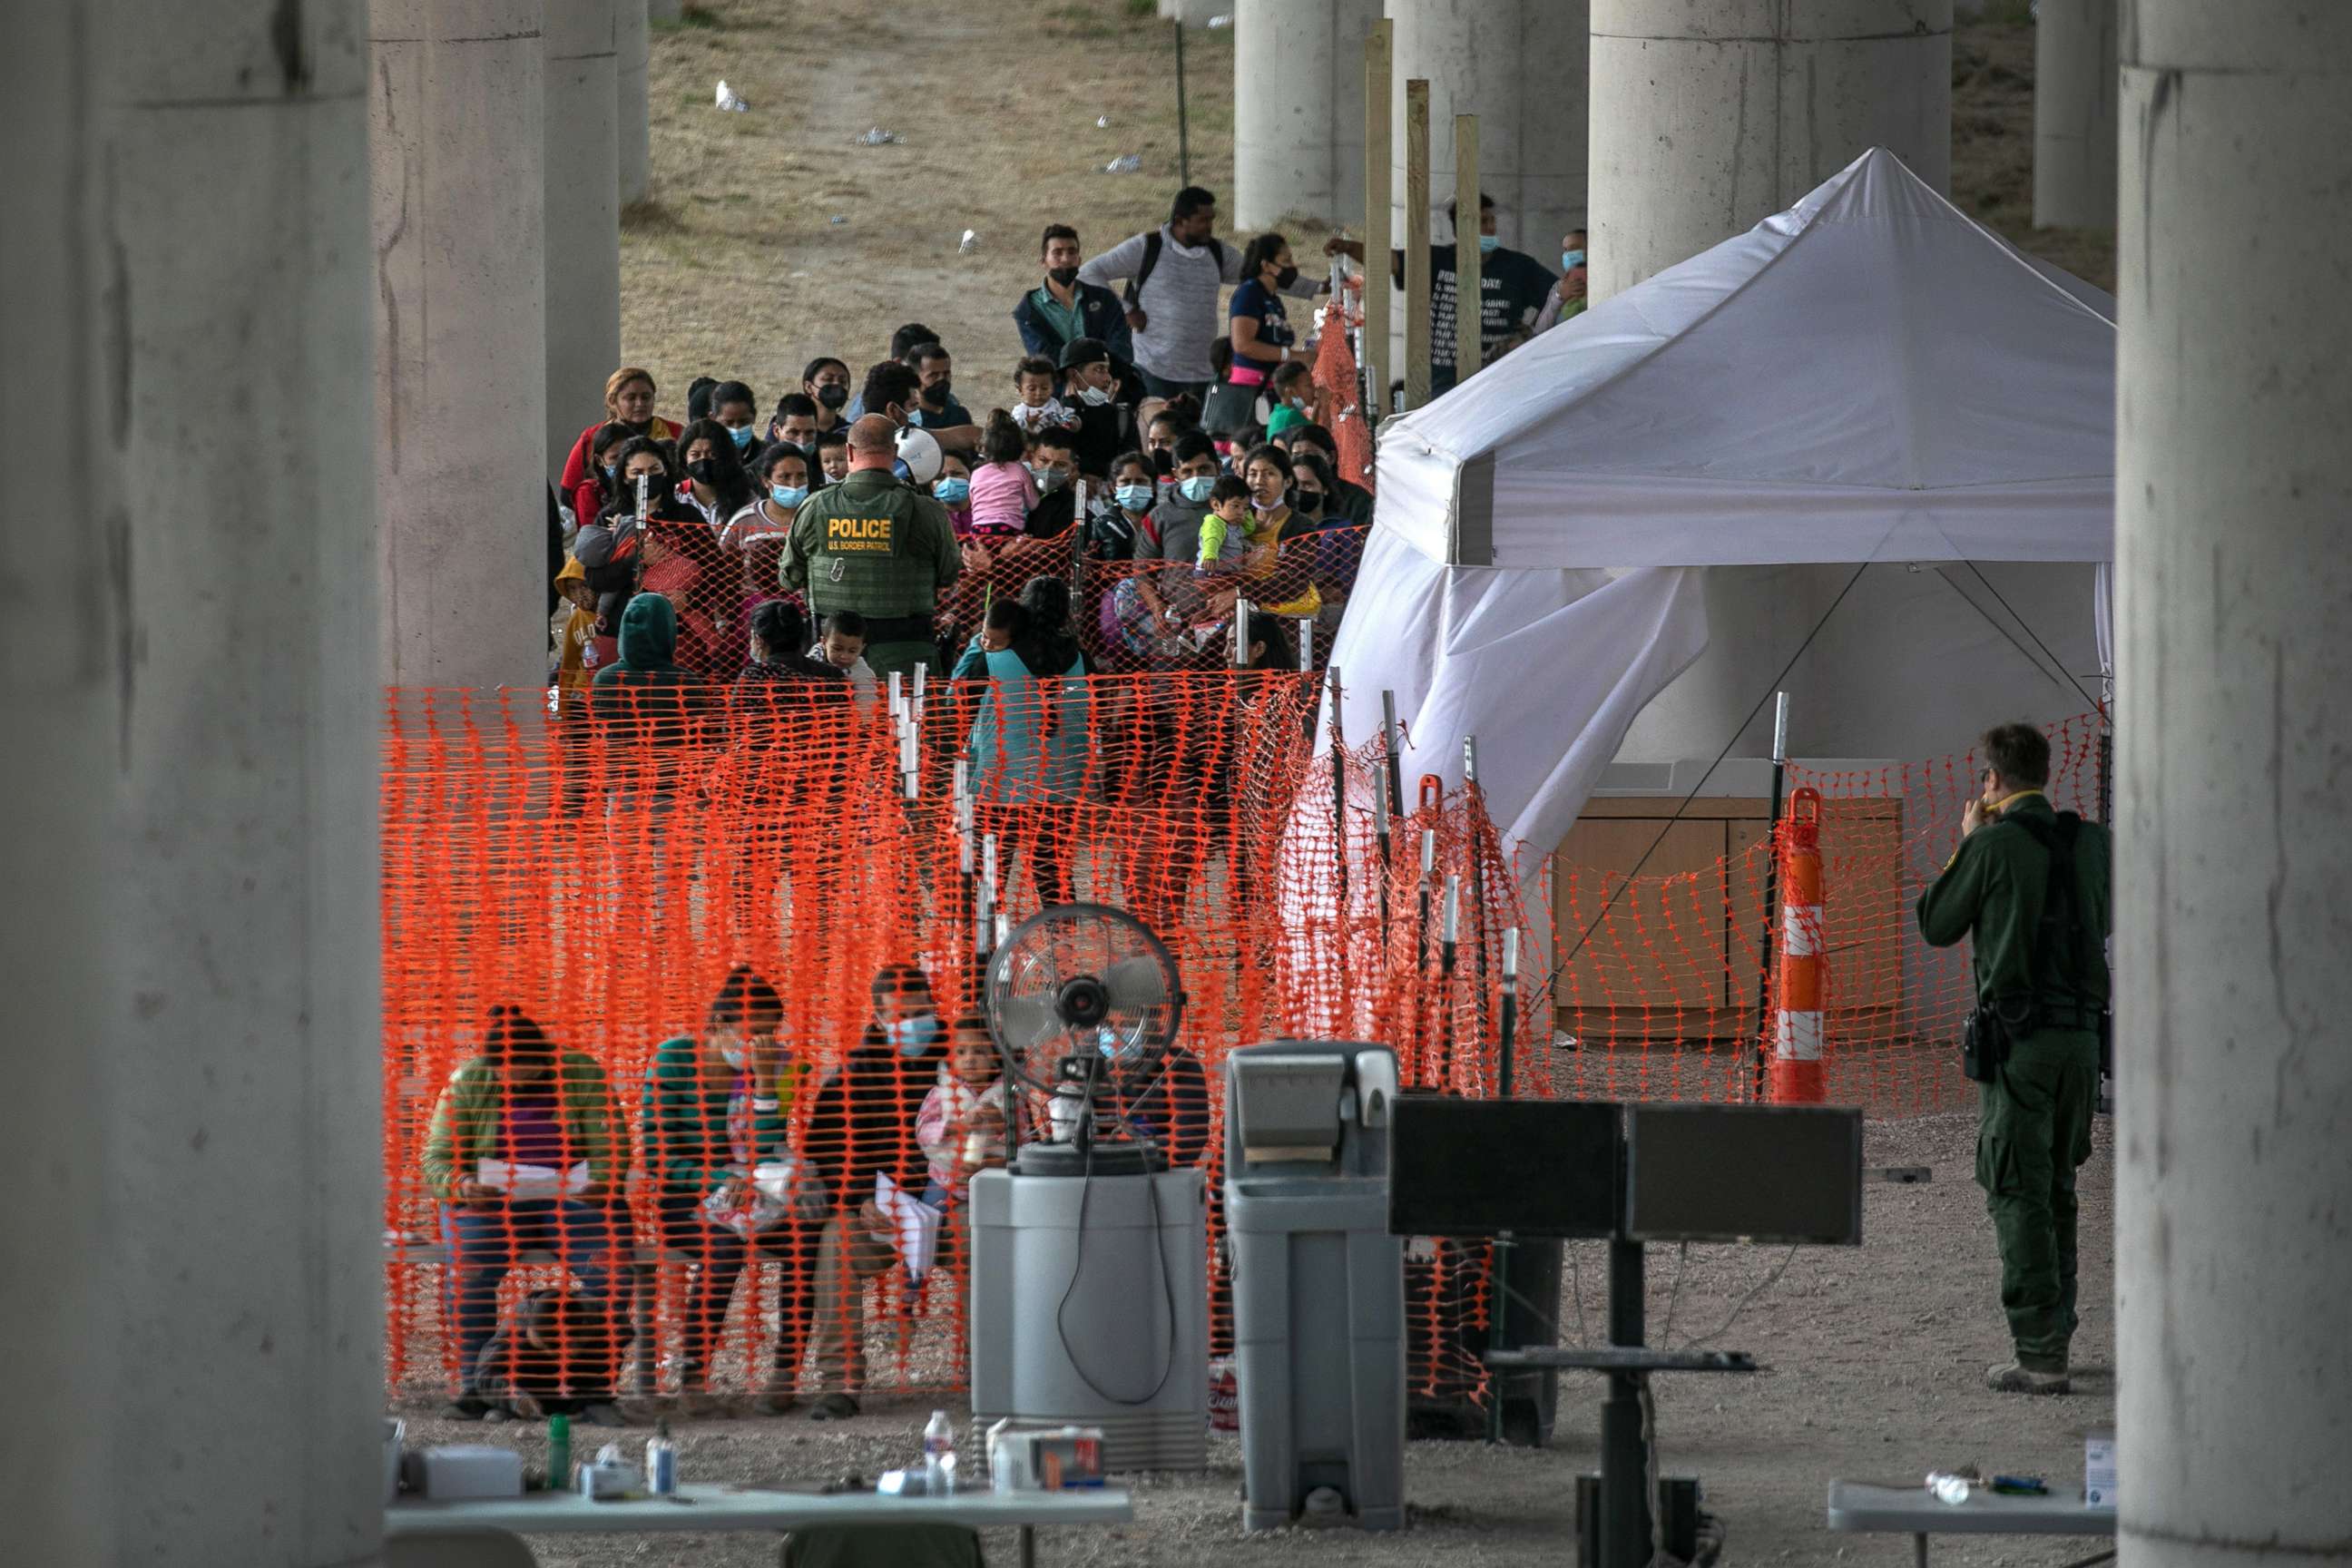 PHOTO: Asylum seekers listen to instructions at an outdoor U.S. Border Patrol processing center under the Anzalduas International Bridge after crossing the Rio Grande from Mexico, March 23, 2021 near Mission, Texas. 